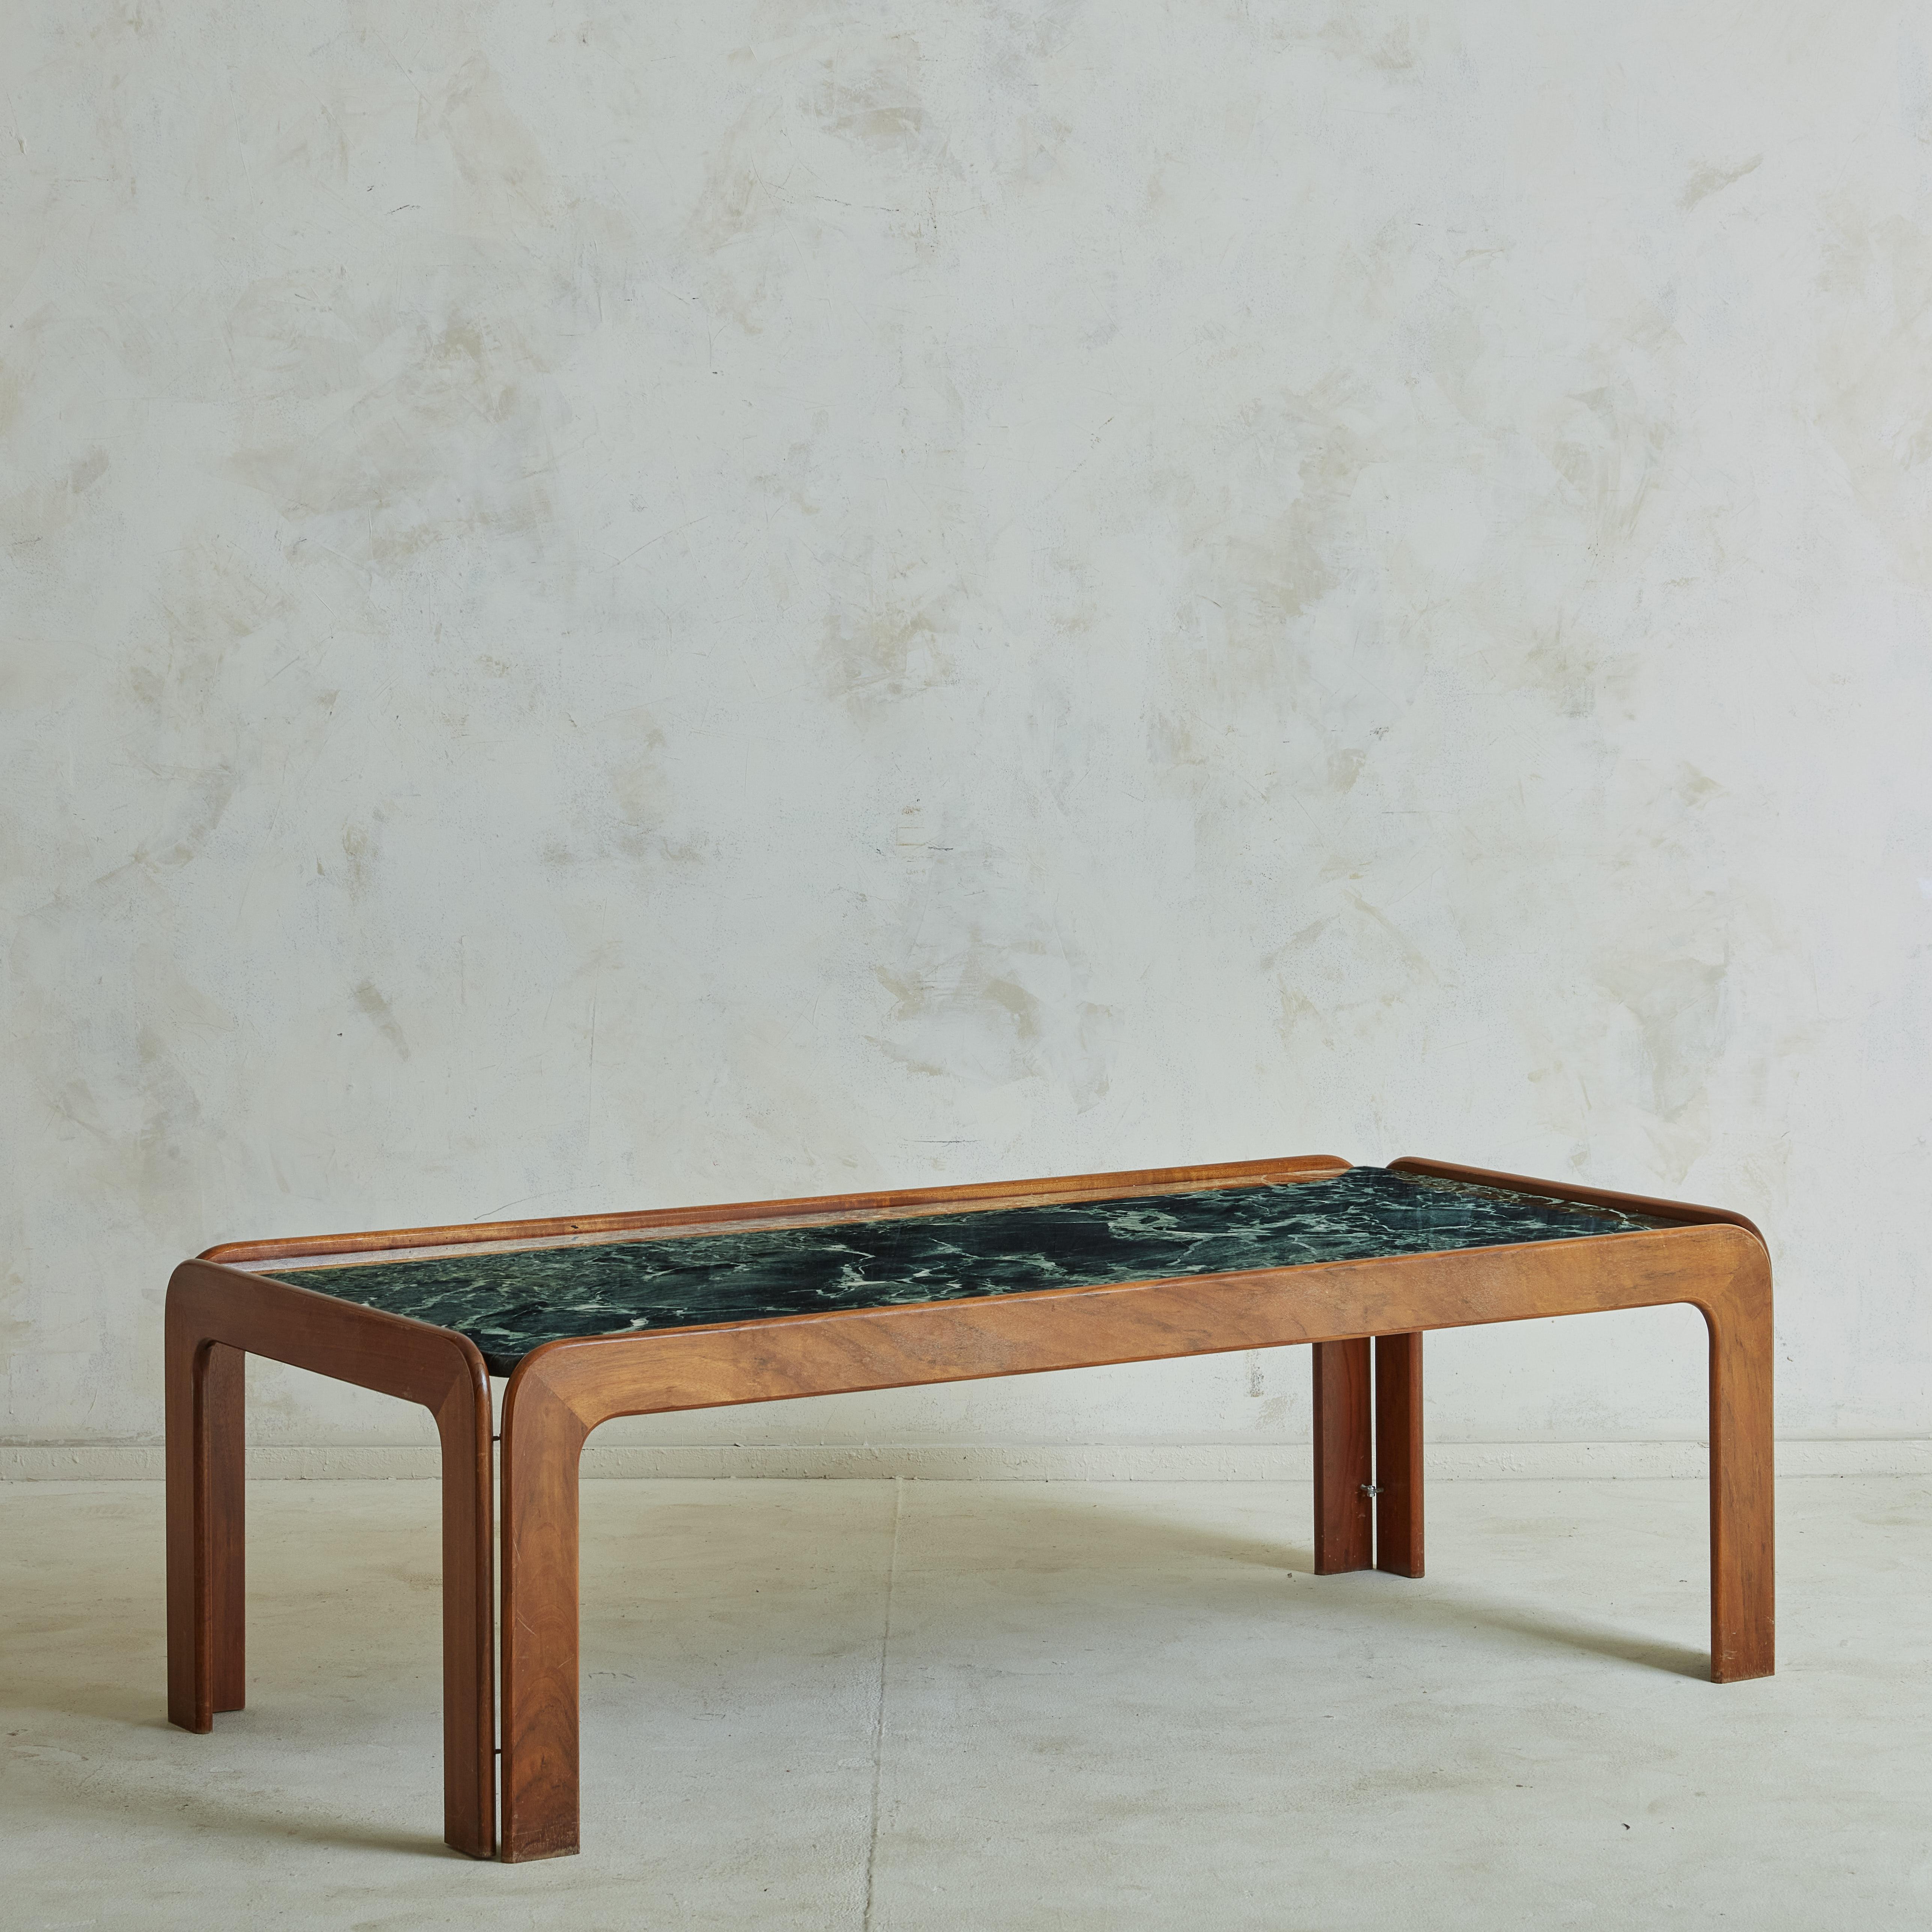 Mid-Century Modern Wood Frame Coffee Table with Green Marble Top from Luxembourg, 1960s For Sale